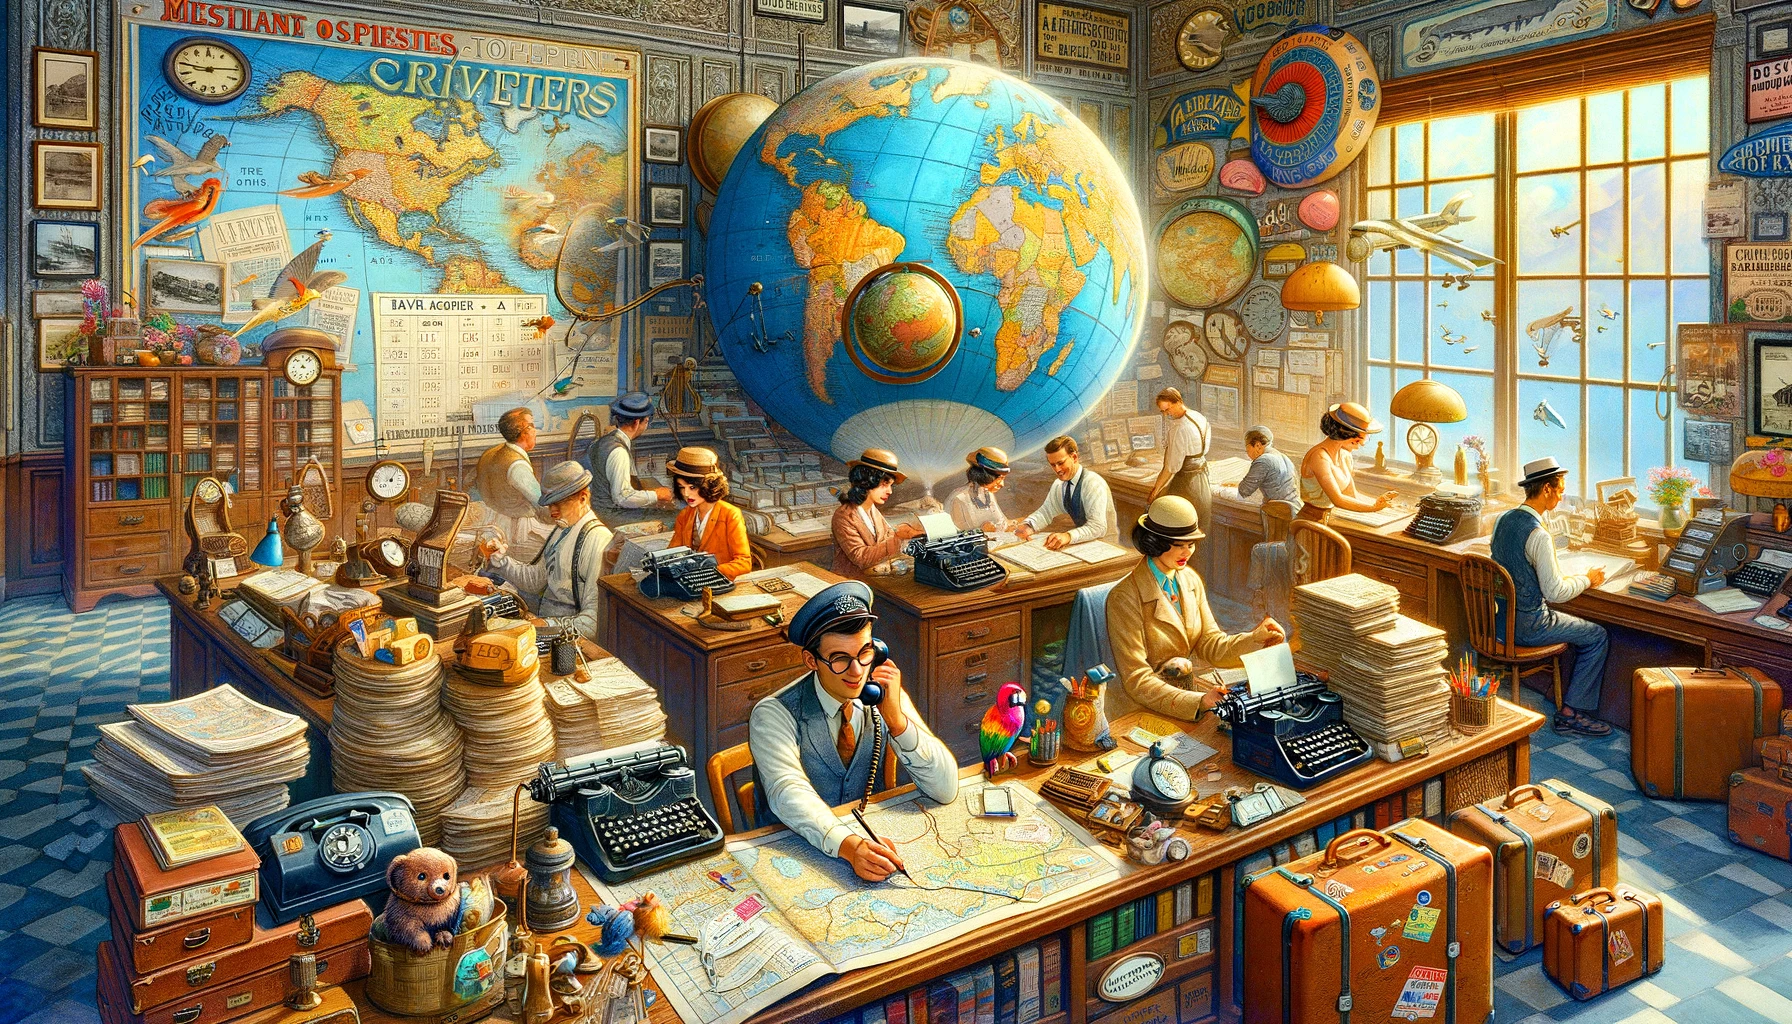 bustling travel agency office from a bygone era, with agents immersed in their work among maps and travel books